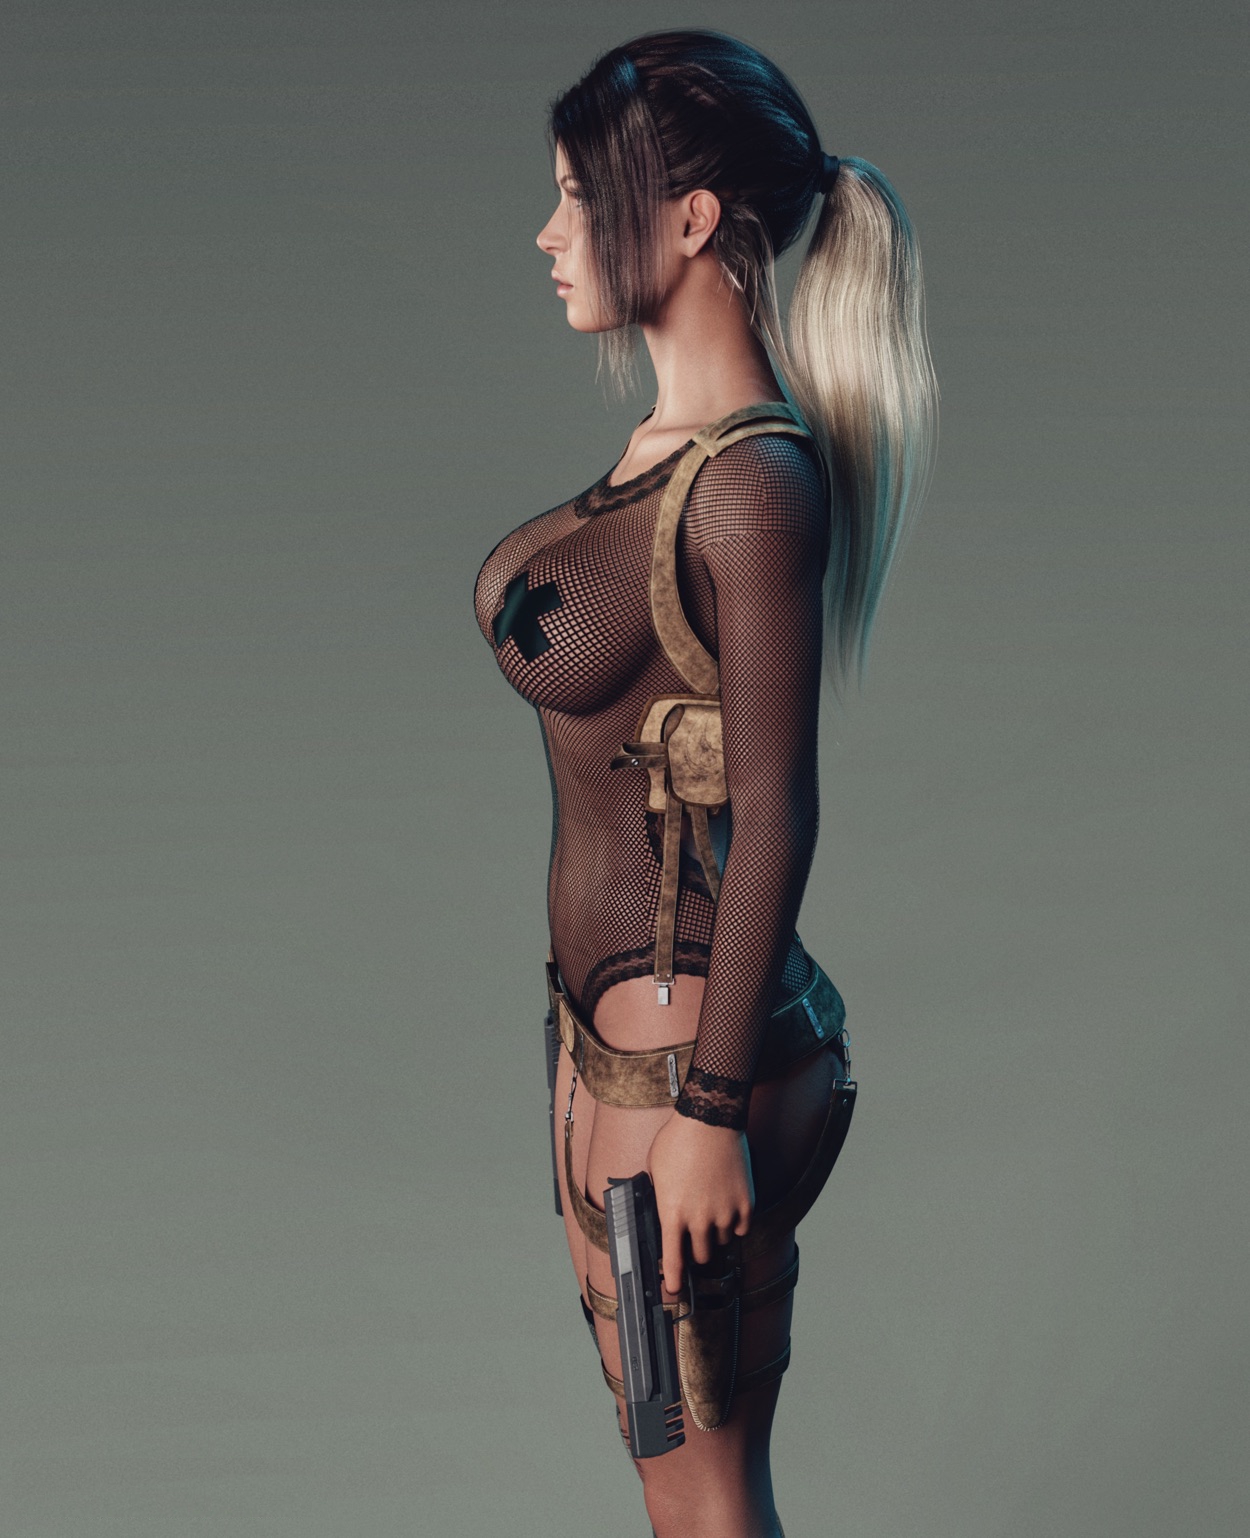 [NOT A GUIDE] The 3Dx artwork of Lara image 27